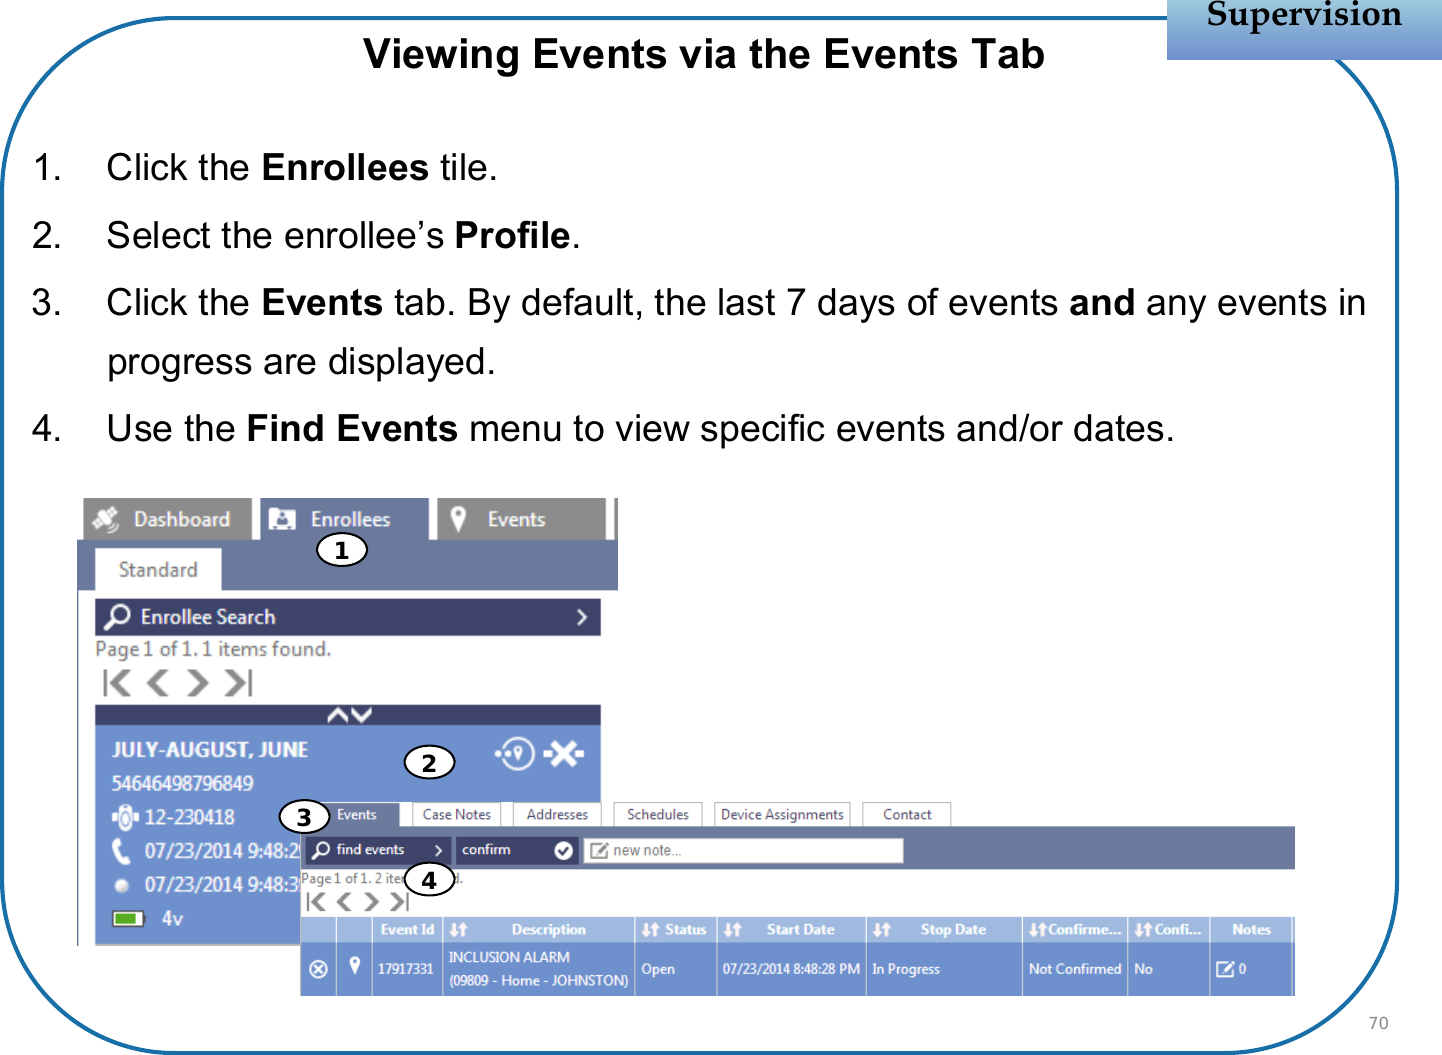 Viewing Events via the Events Tab1. Click the Enrollees tile.2. Select the enrollee’s Profile.3. Click the Events tab. By default, the last 7 days of events and any events in progress are displayed.4. Use the Find Events menu to view specific events and/or dates.SupervisionSupervision703412